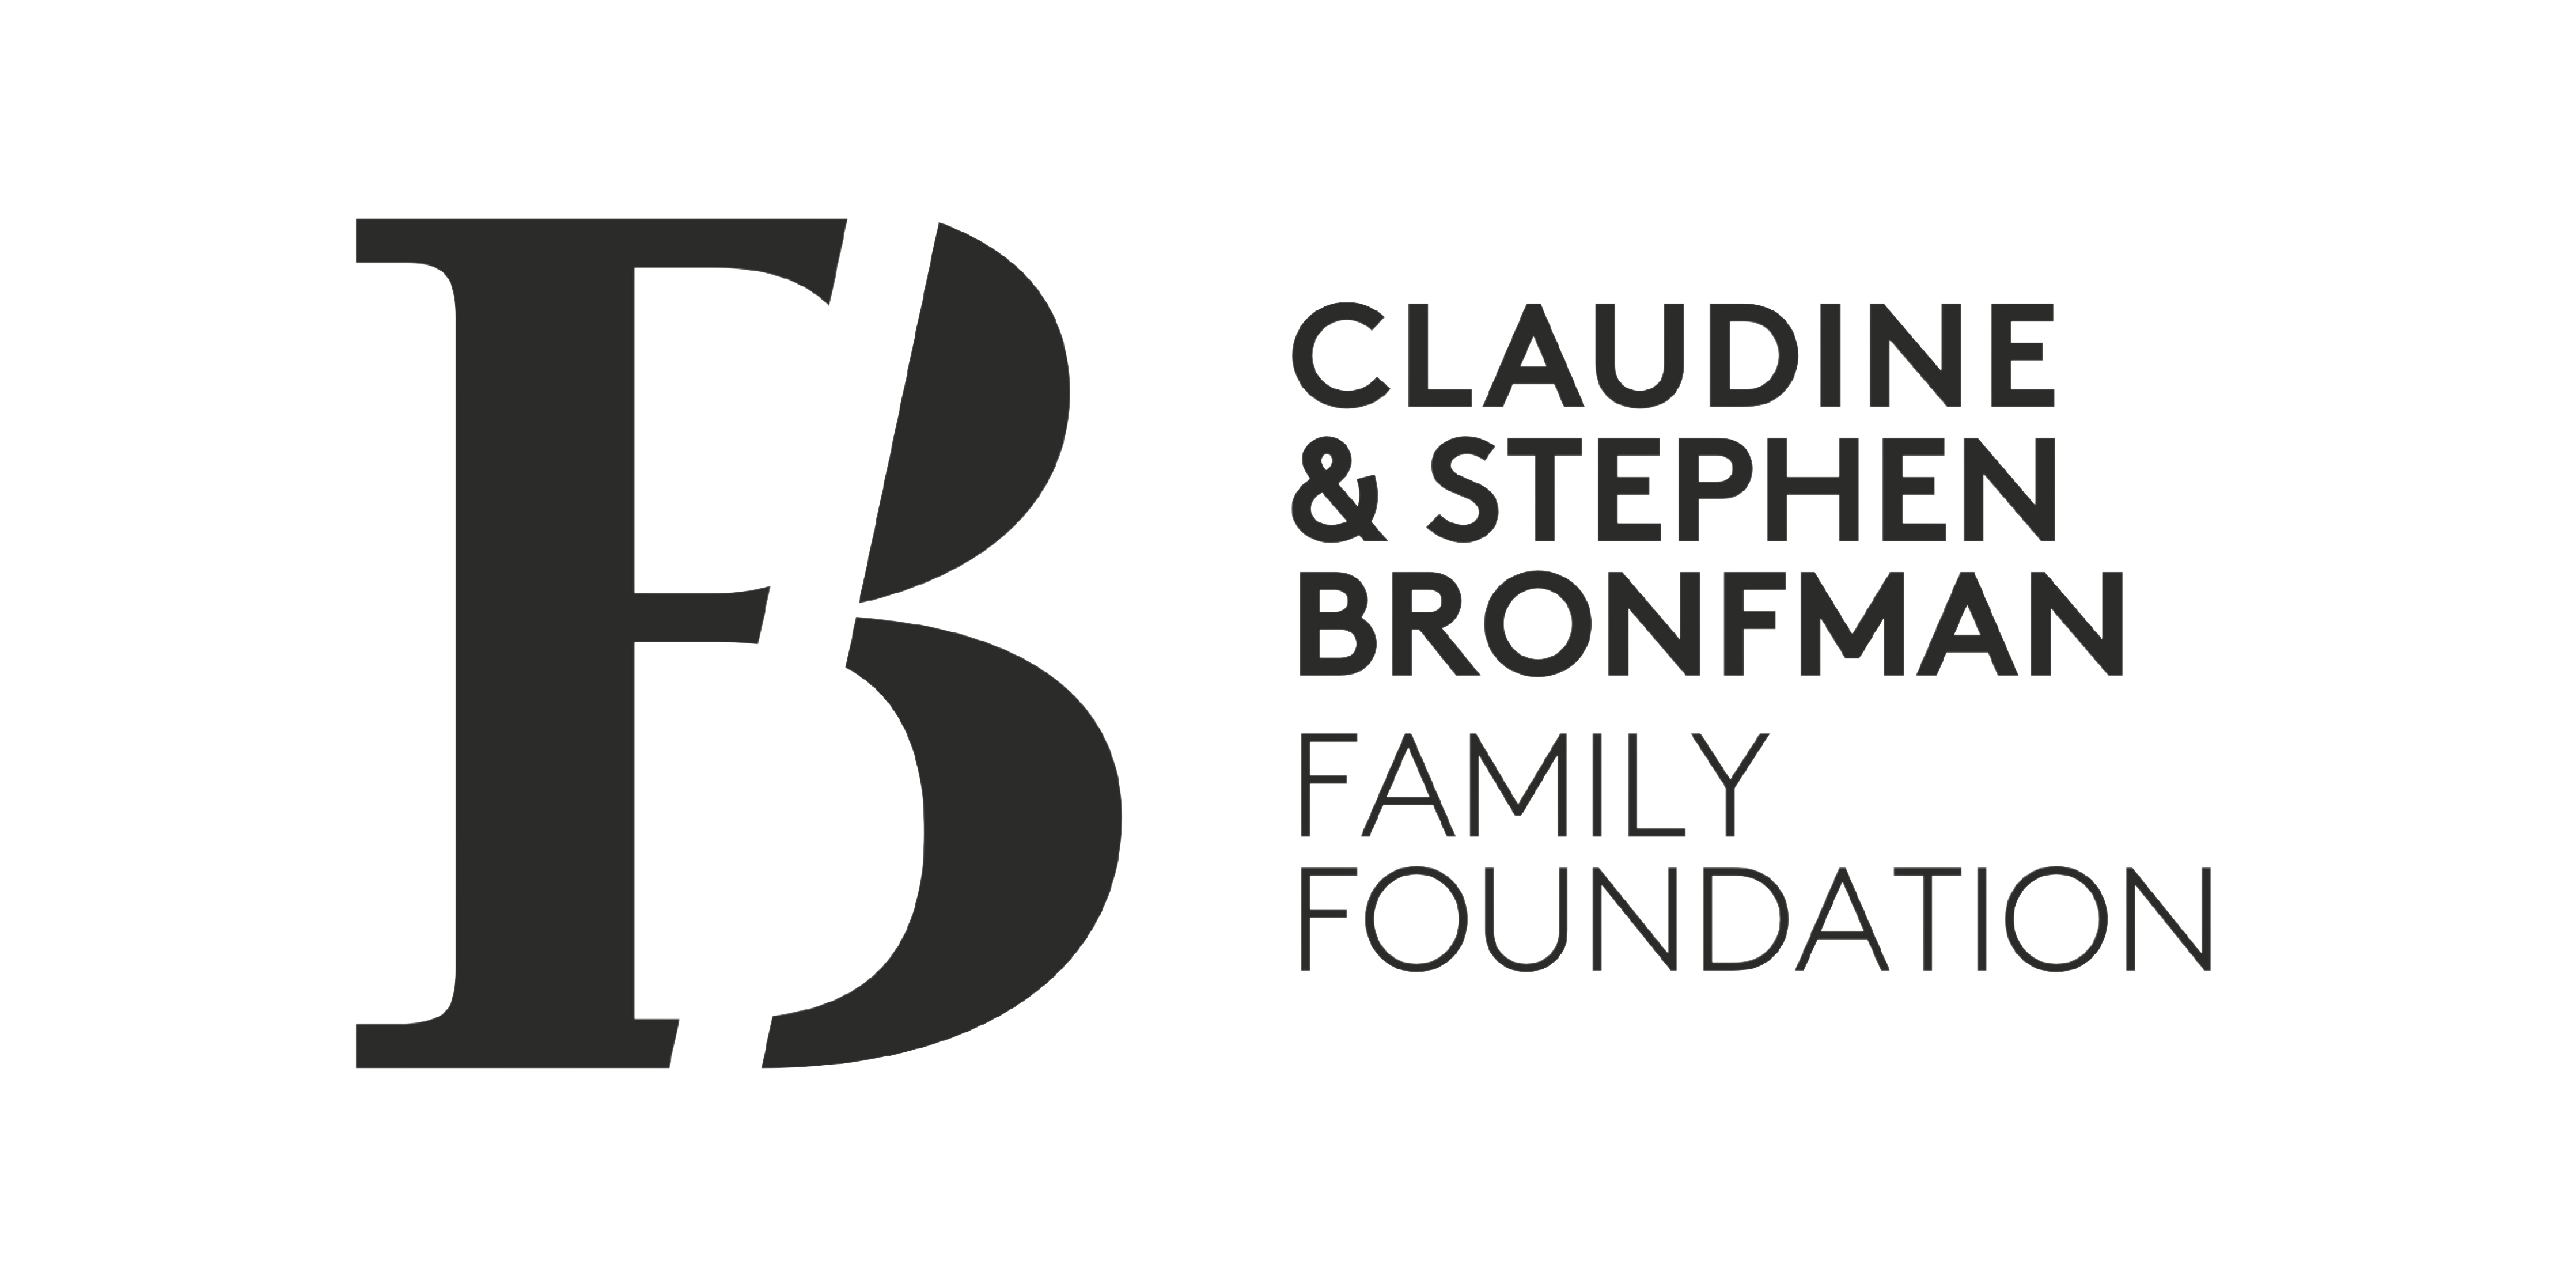 CLAUDINE AND STEPHEN BRONFMAN FAMILY FOUNDATION